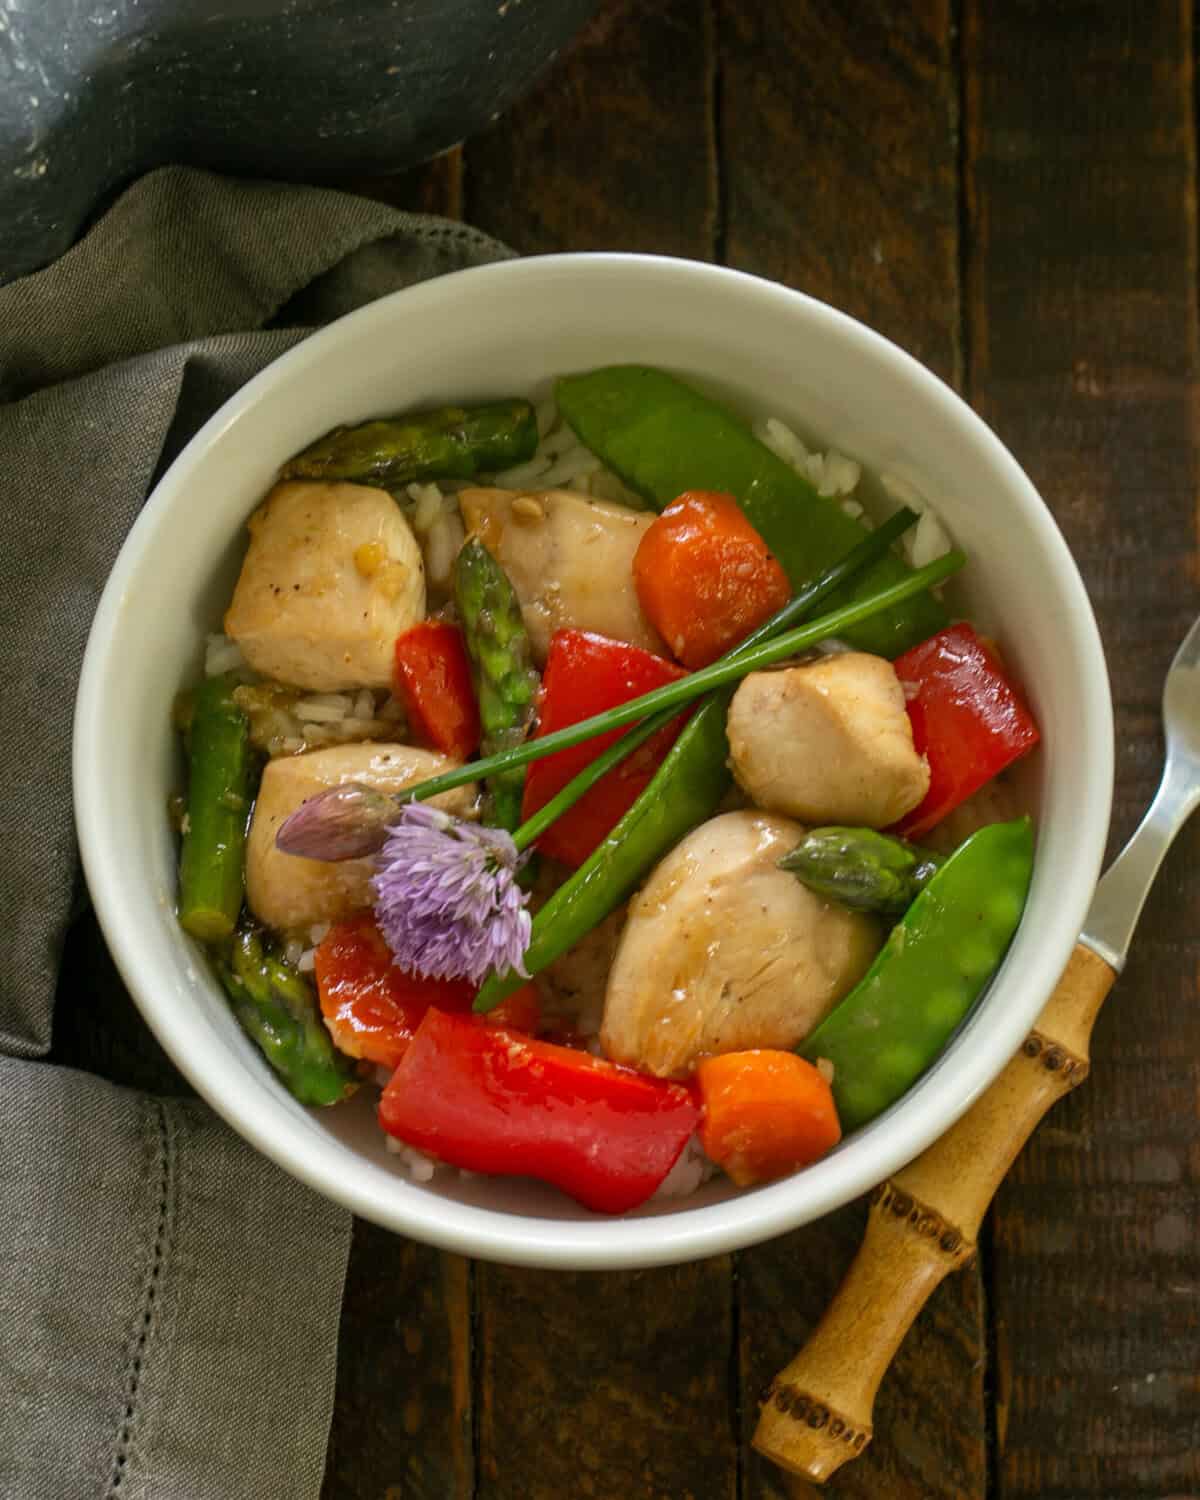 Chicken Stir Fry in a white bowl with chive garnish and a fork.